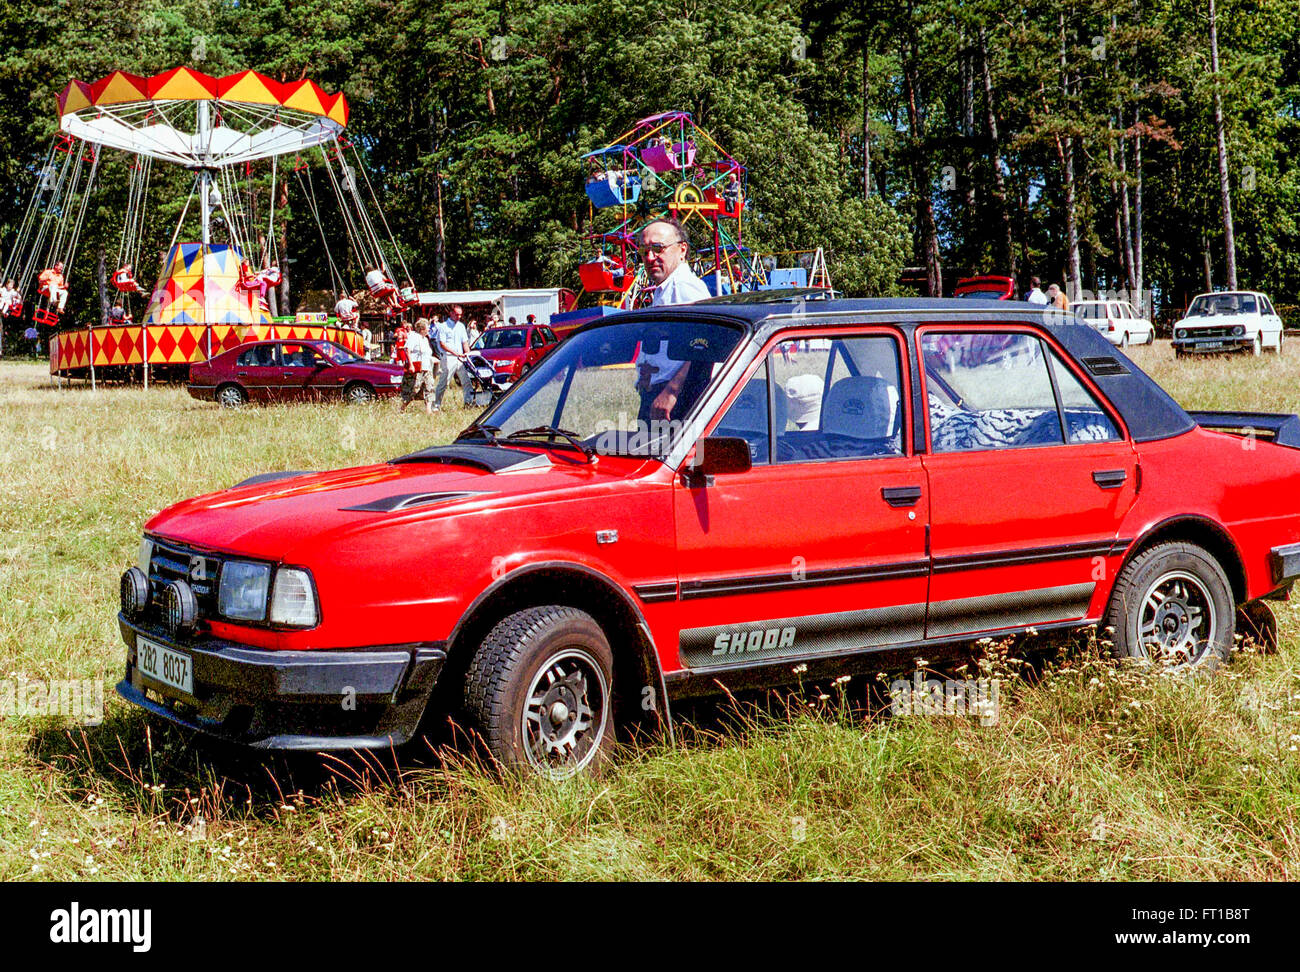 Czechoslovakia product from the 1980s Red car Skoda 120 parking on the meadow during a village fair, Moravia Czech Republic Stock Photo